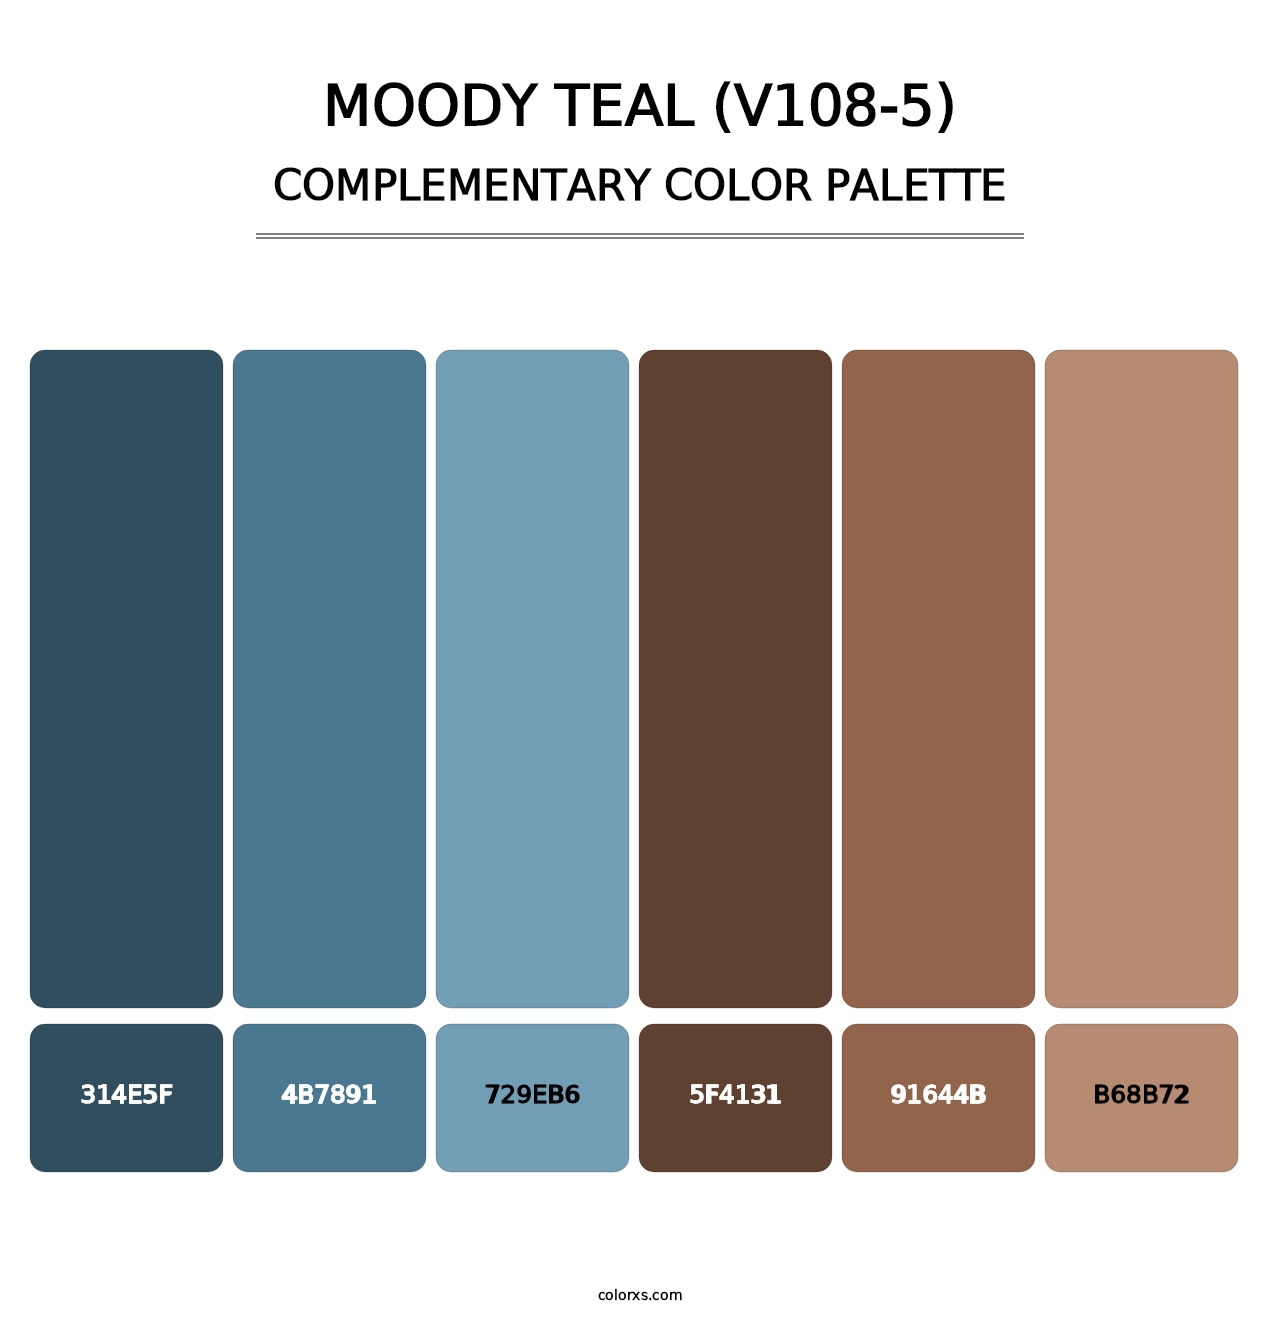 Moody Teal (V108-5) - Complementary Color Palette